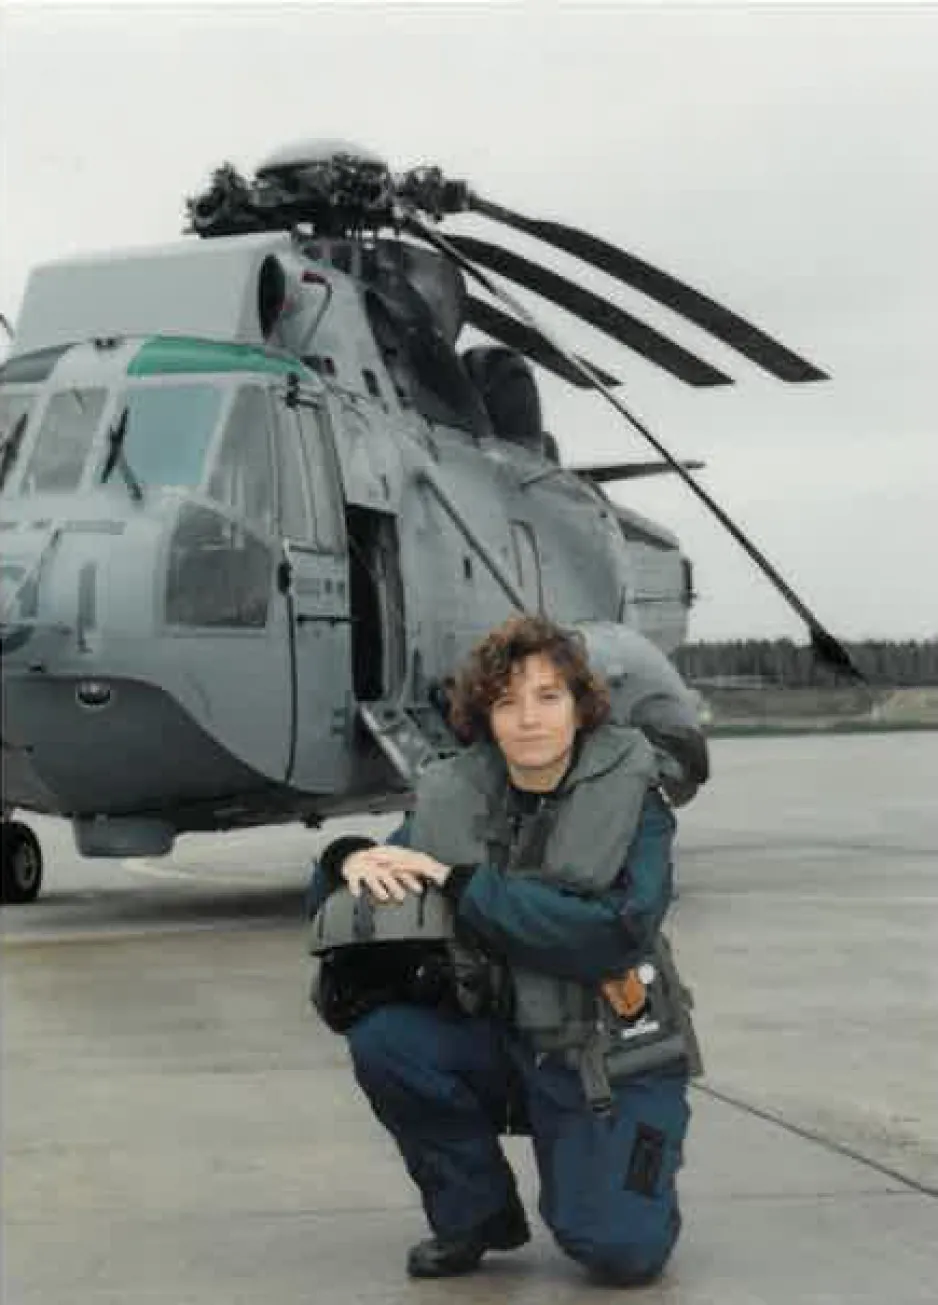 A woman in a blue military uniform poses in front of a large helicopter.